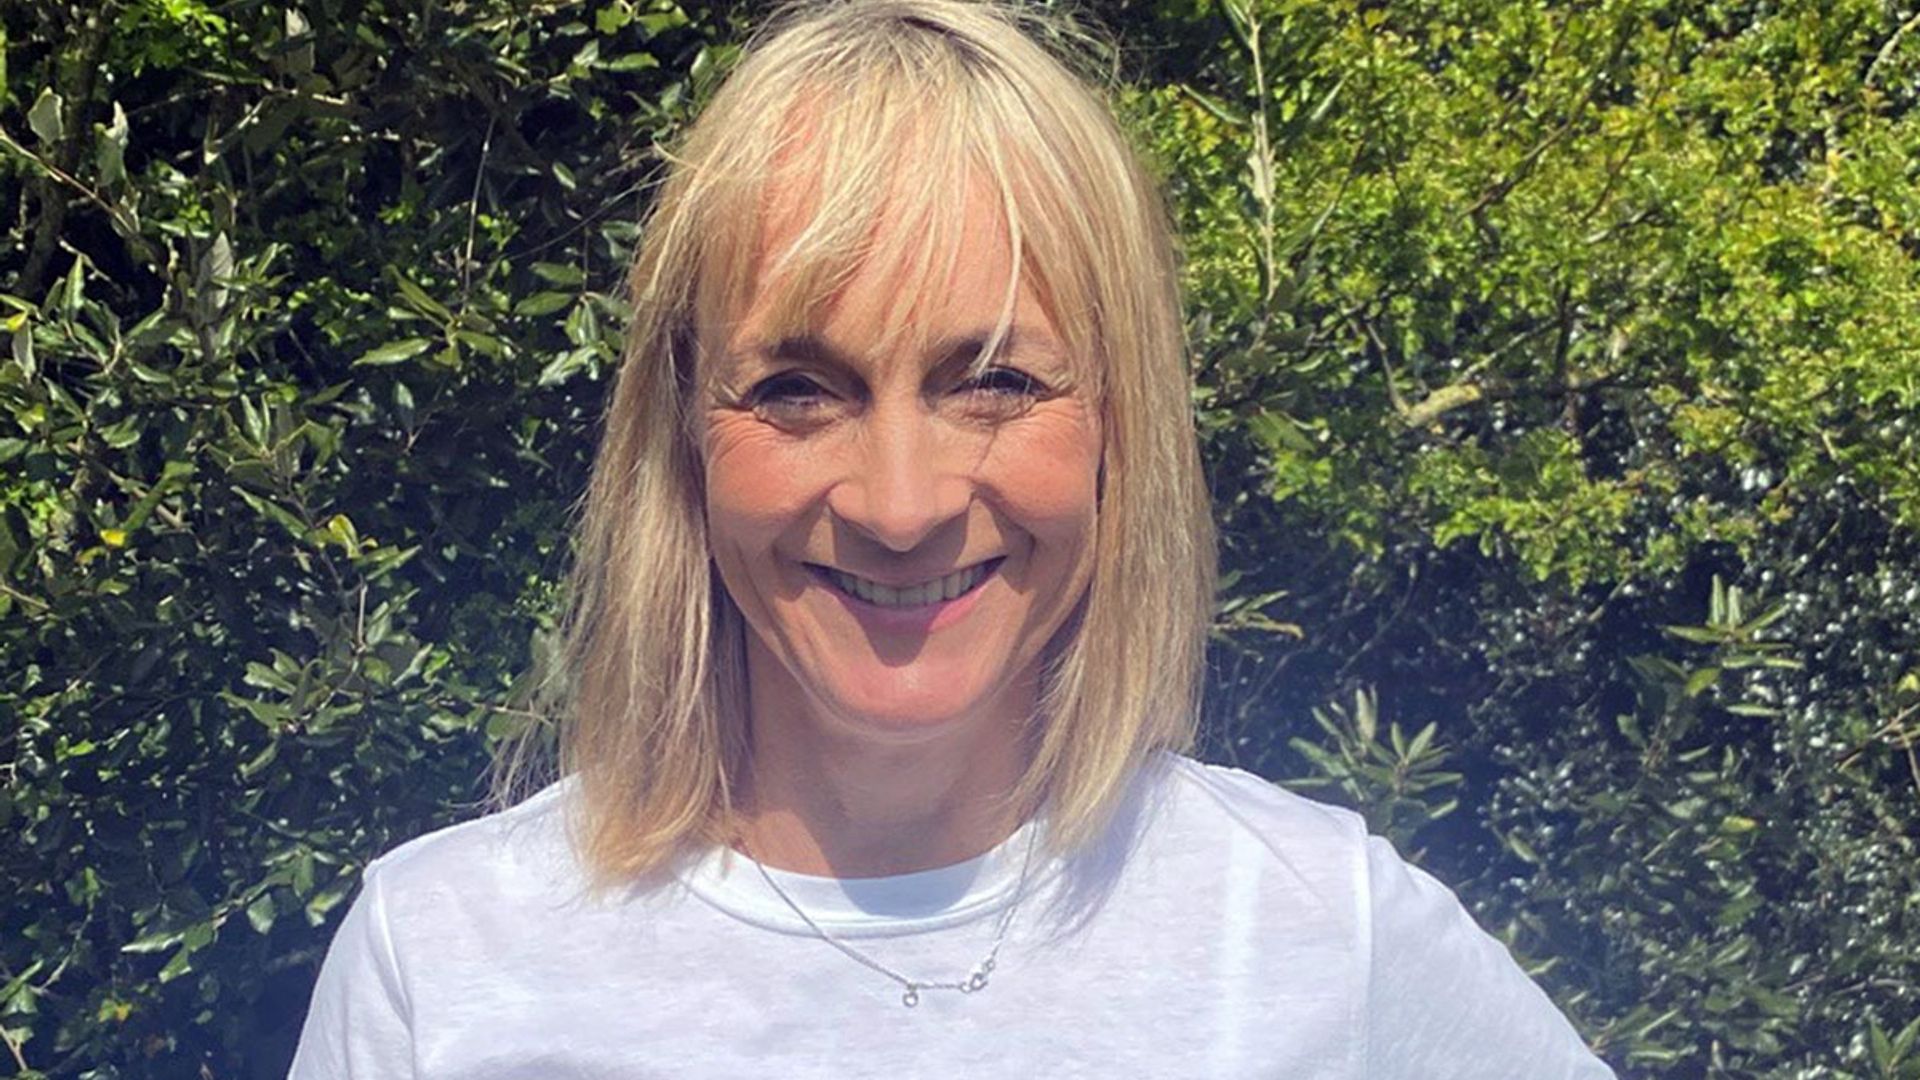 Louise Minchin overcomes personal challenge after leaving BBC Breakfast – see photo